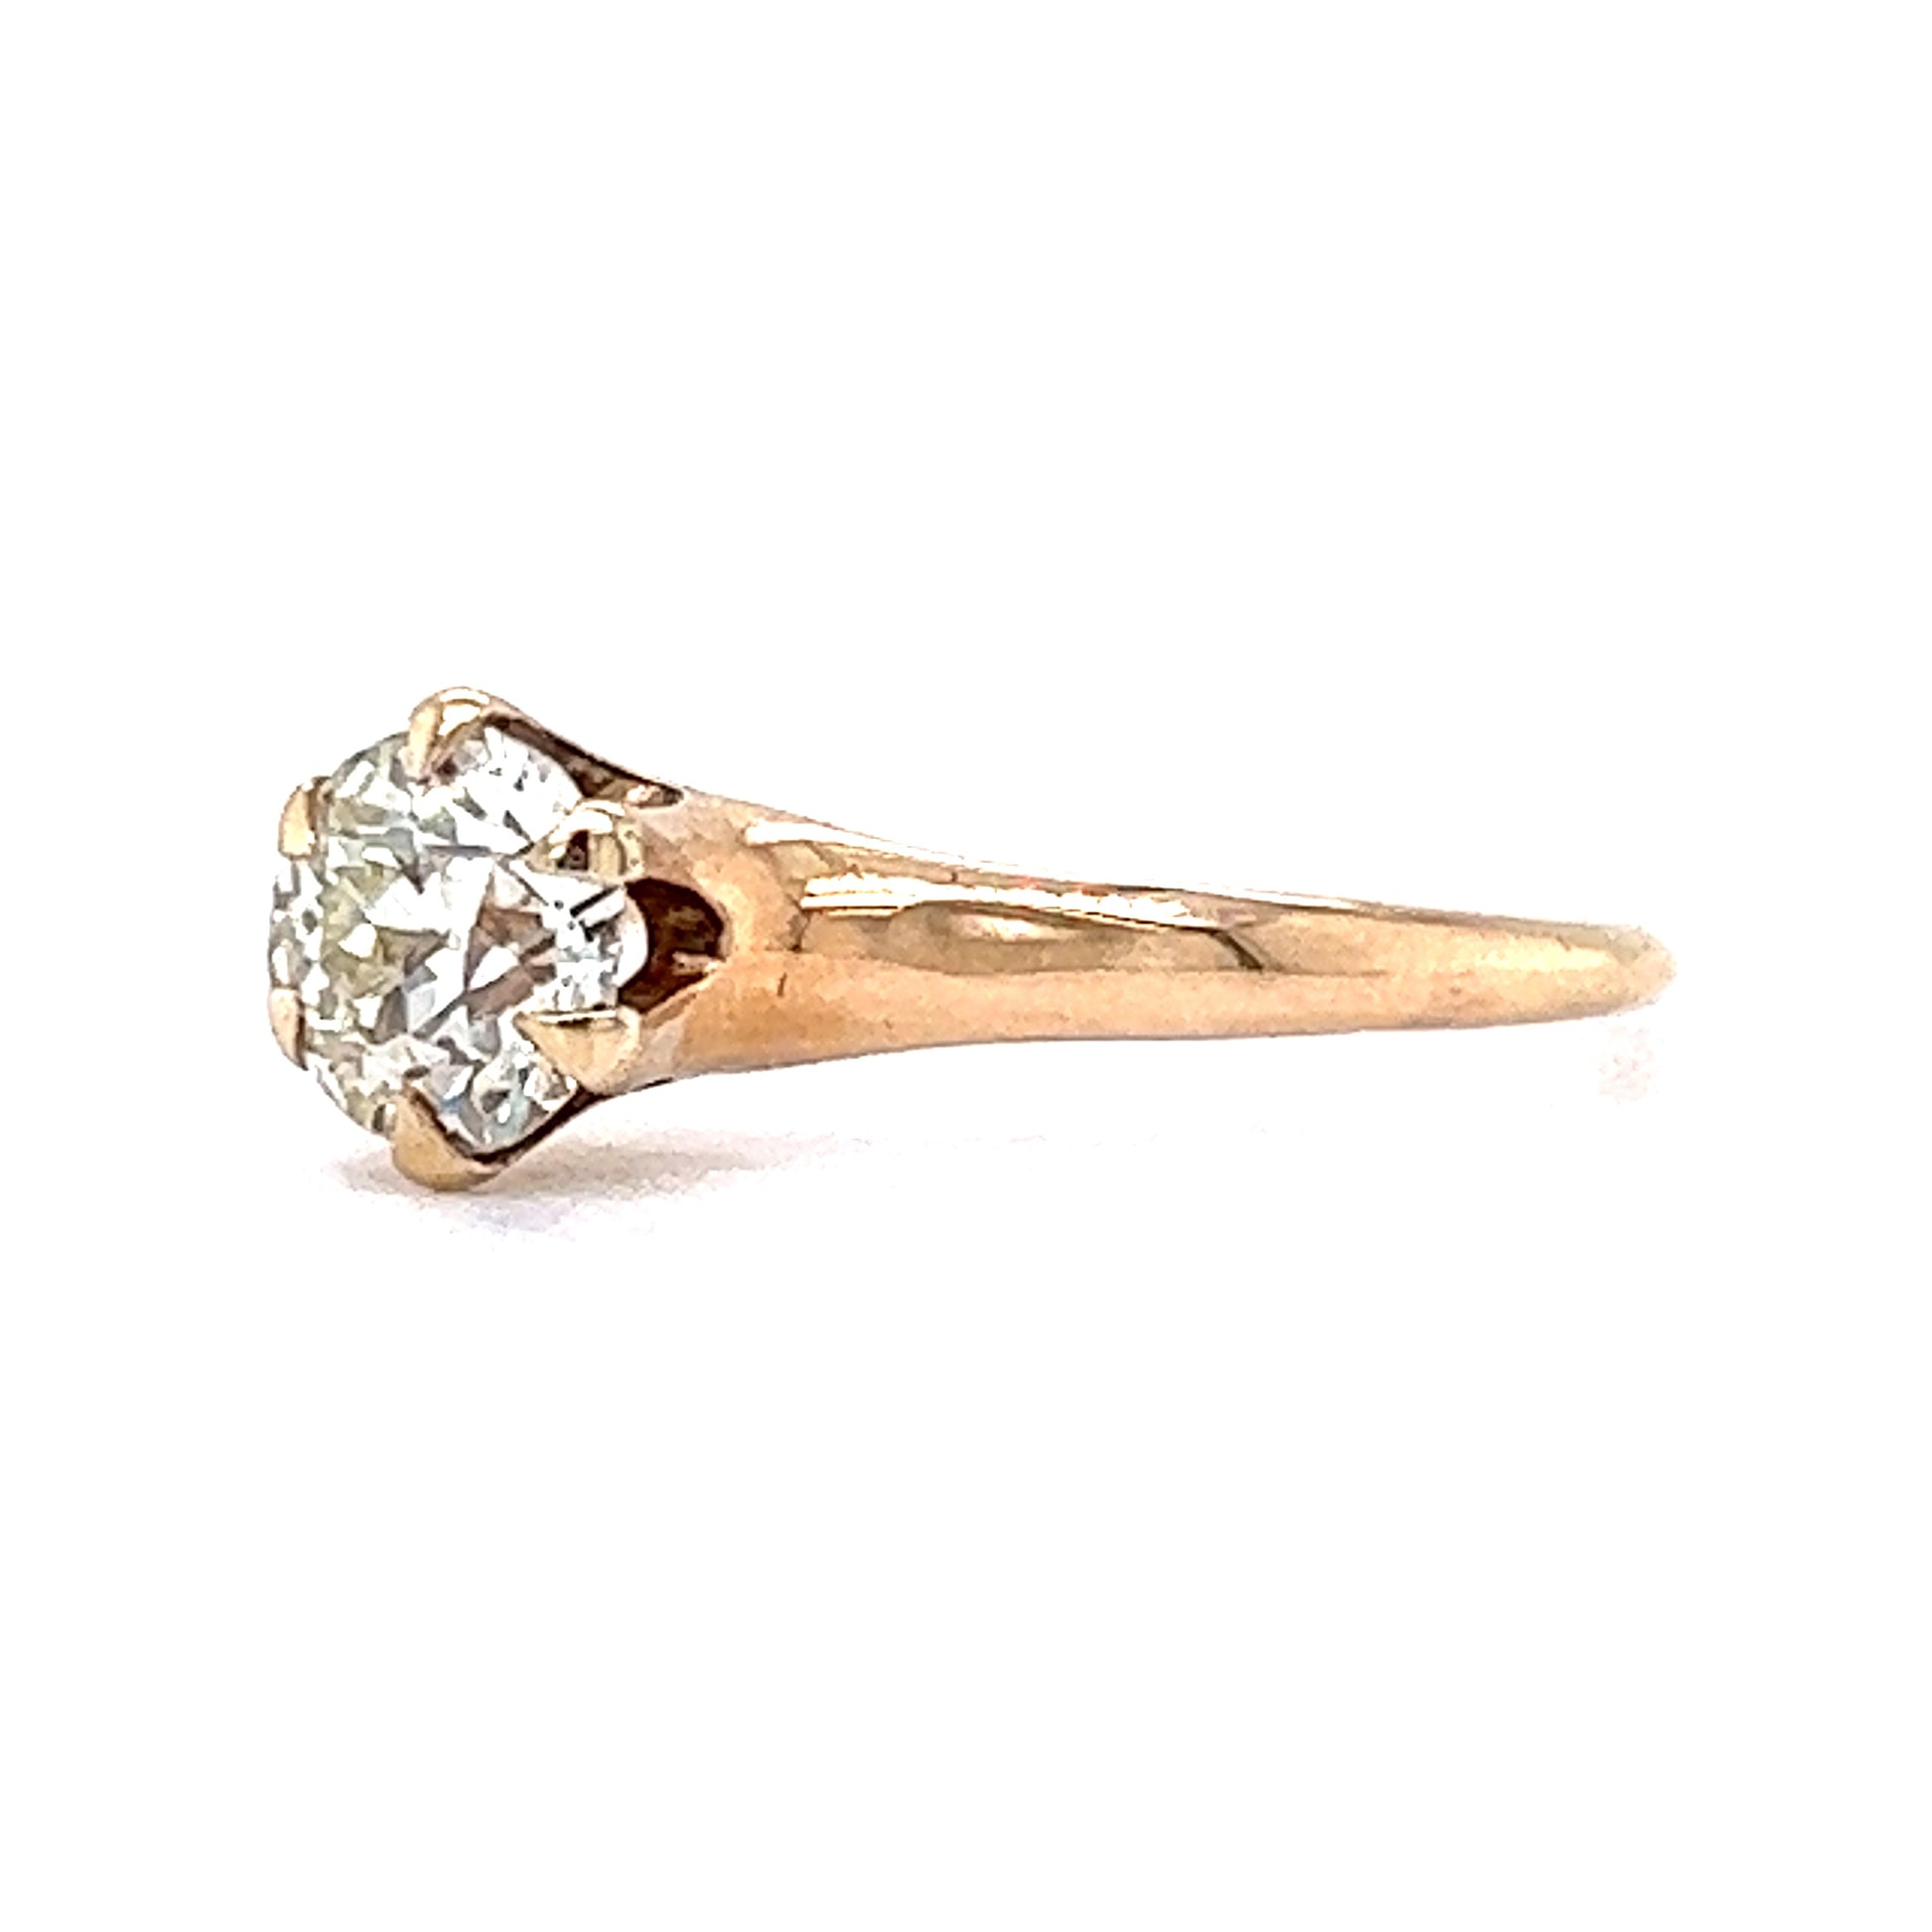 Solitaire Victorian .60 Diamond Engagement Ring in 14k Yellow GoldComposition: 14 Karat Yellow GoldRing Size: 7Total Diamond Weight: .60 ctTotal Gram Weight: 1.4 gInscription: 22